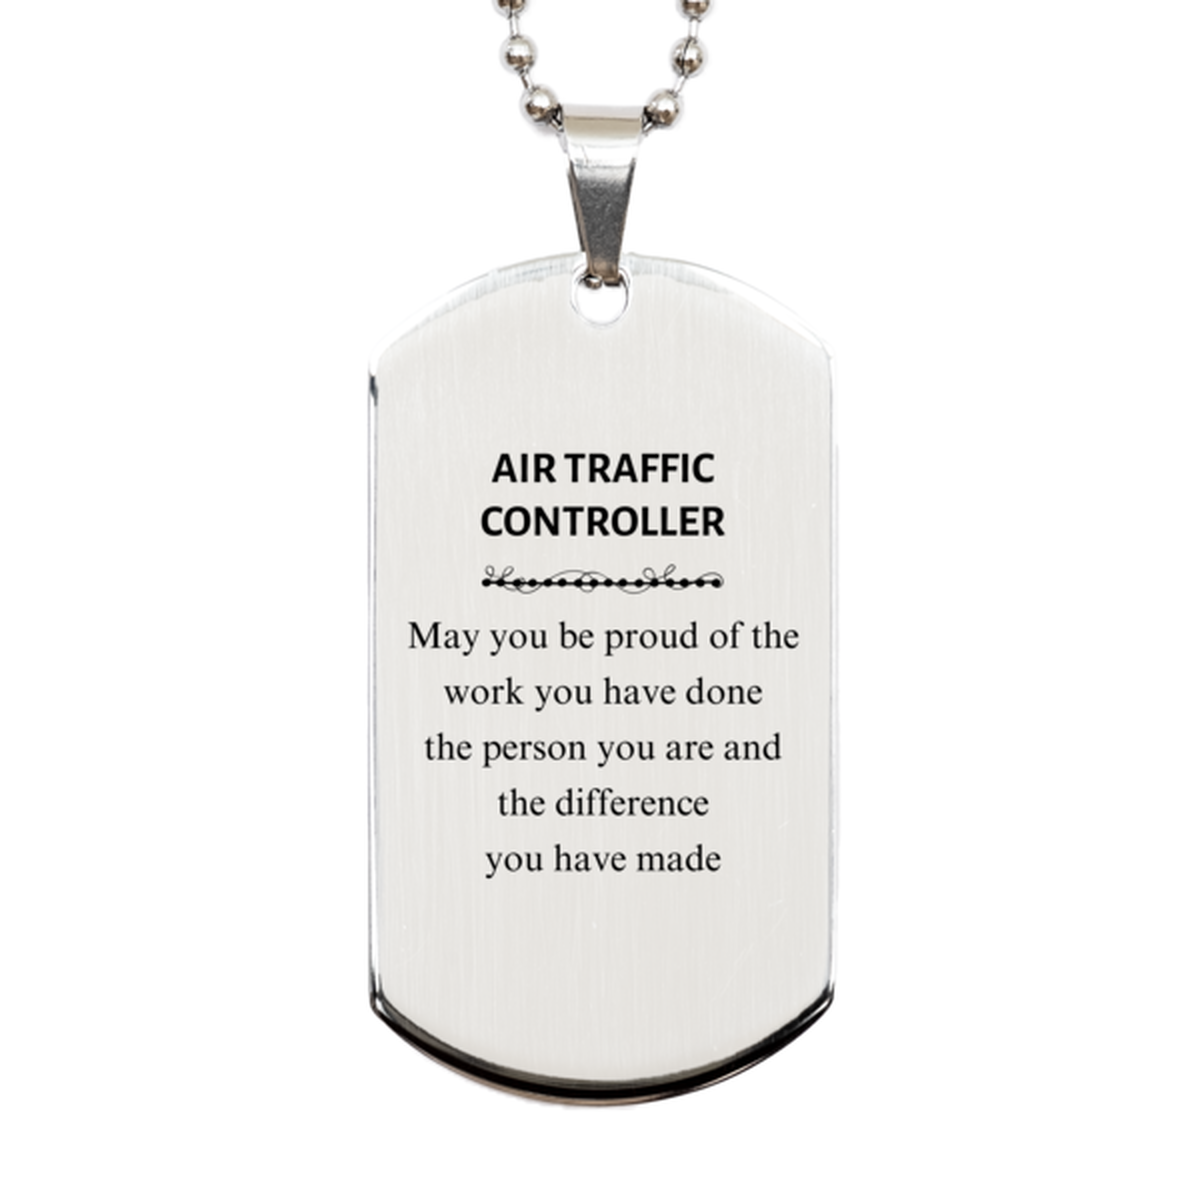 Air Traffic Controller May you be proud of the work you have done, Retirement Air Traffic Controller Silver Dog Tag for Colleague Appreciation Gifts Amazing for Air Traffic Controller